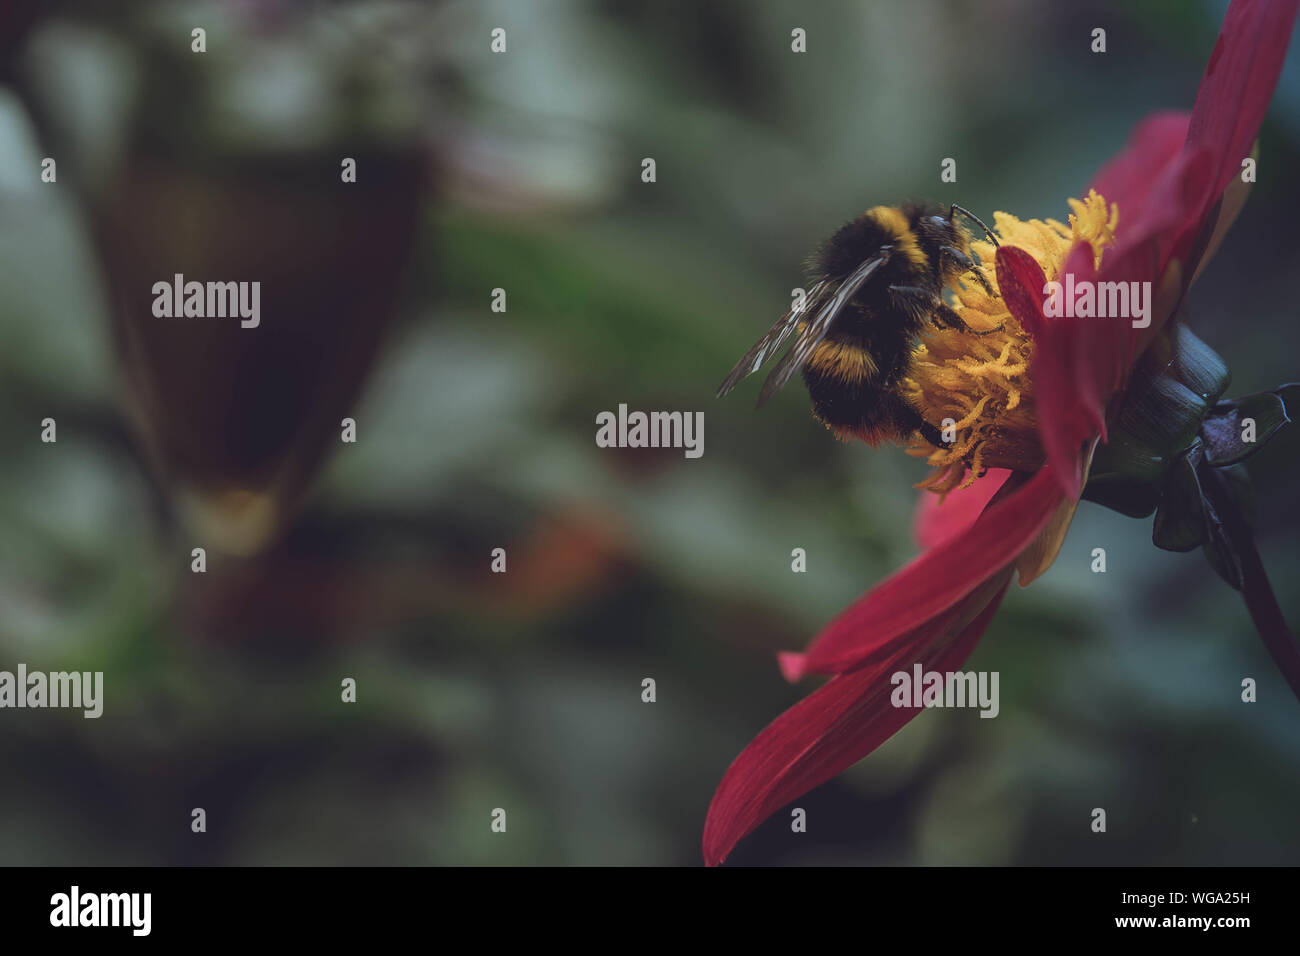 Close-up Of Bumble Bee On Flower Stock Photo